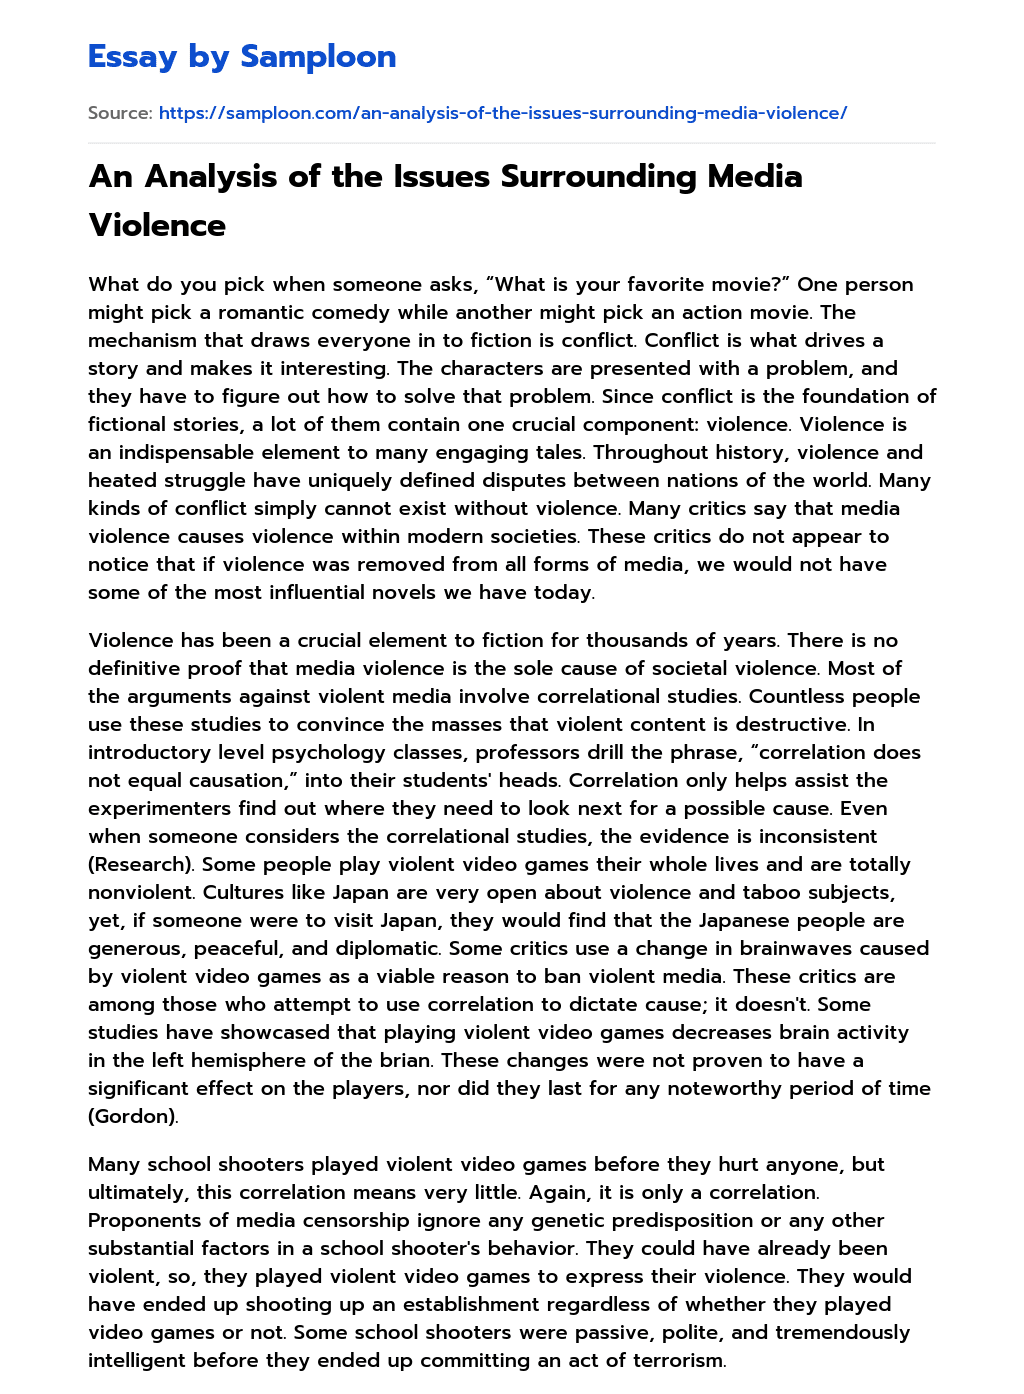 An Analysis of the Issues Surrounding Media Violence essay